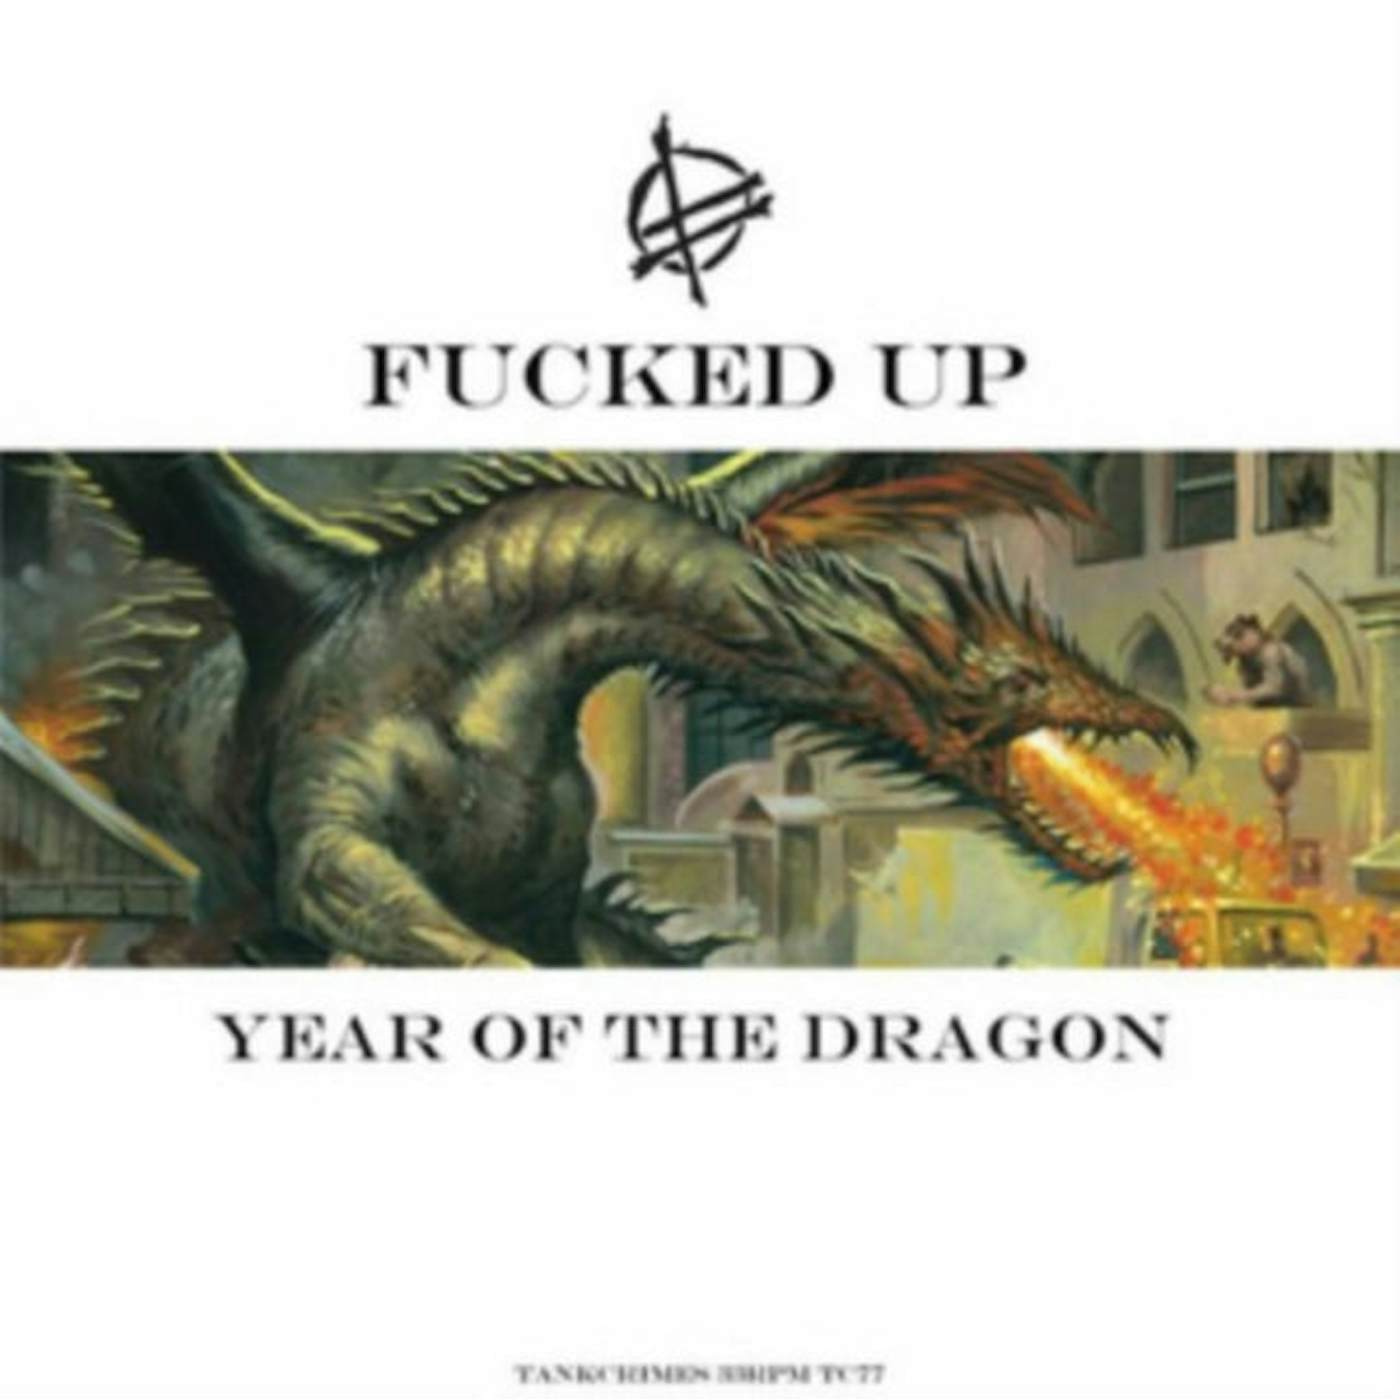 Fucked Up CD - Year Of The Dragon